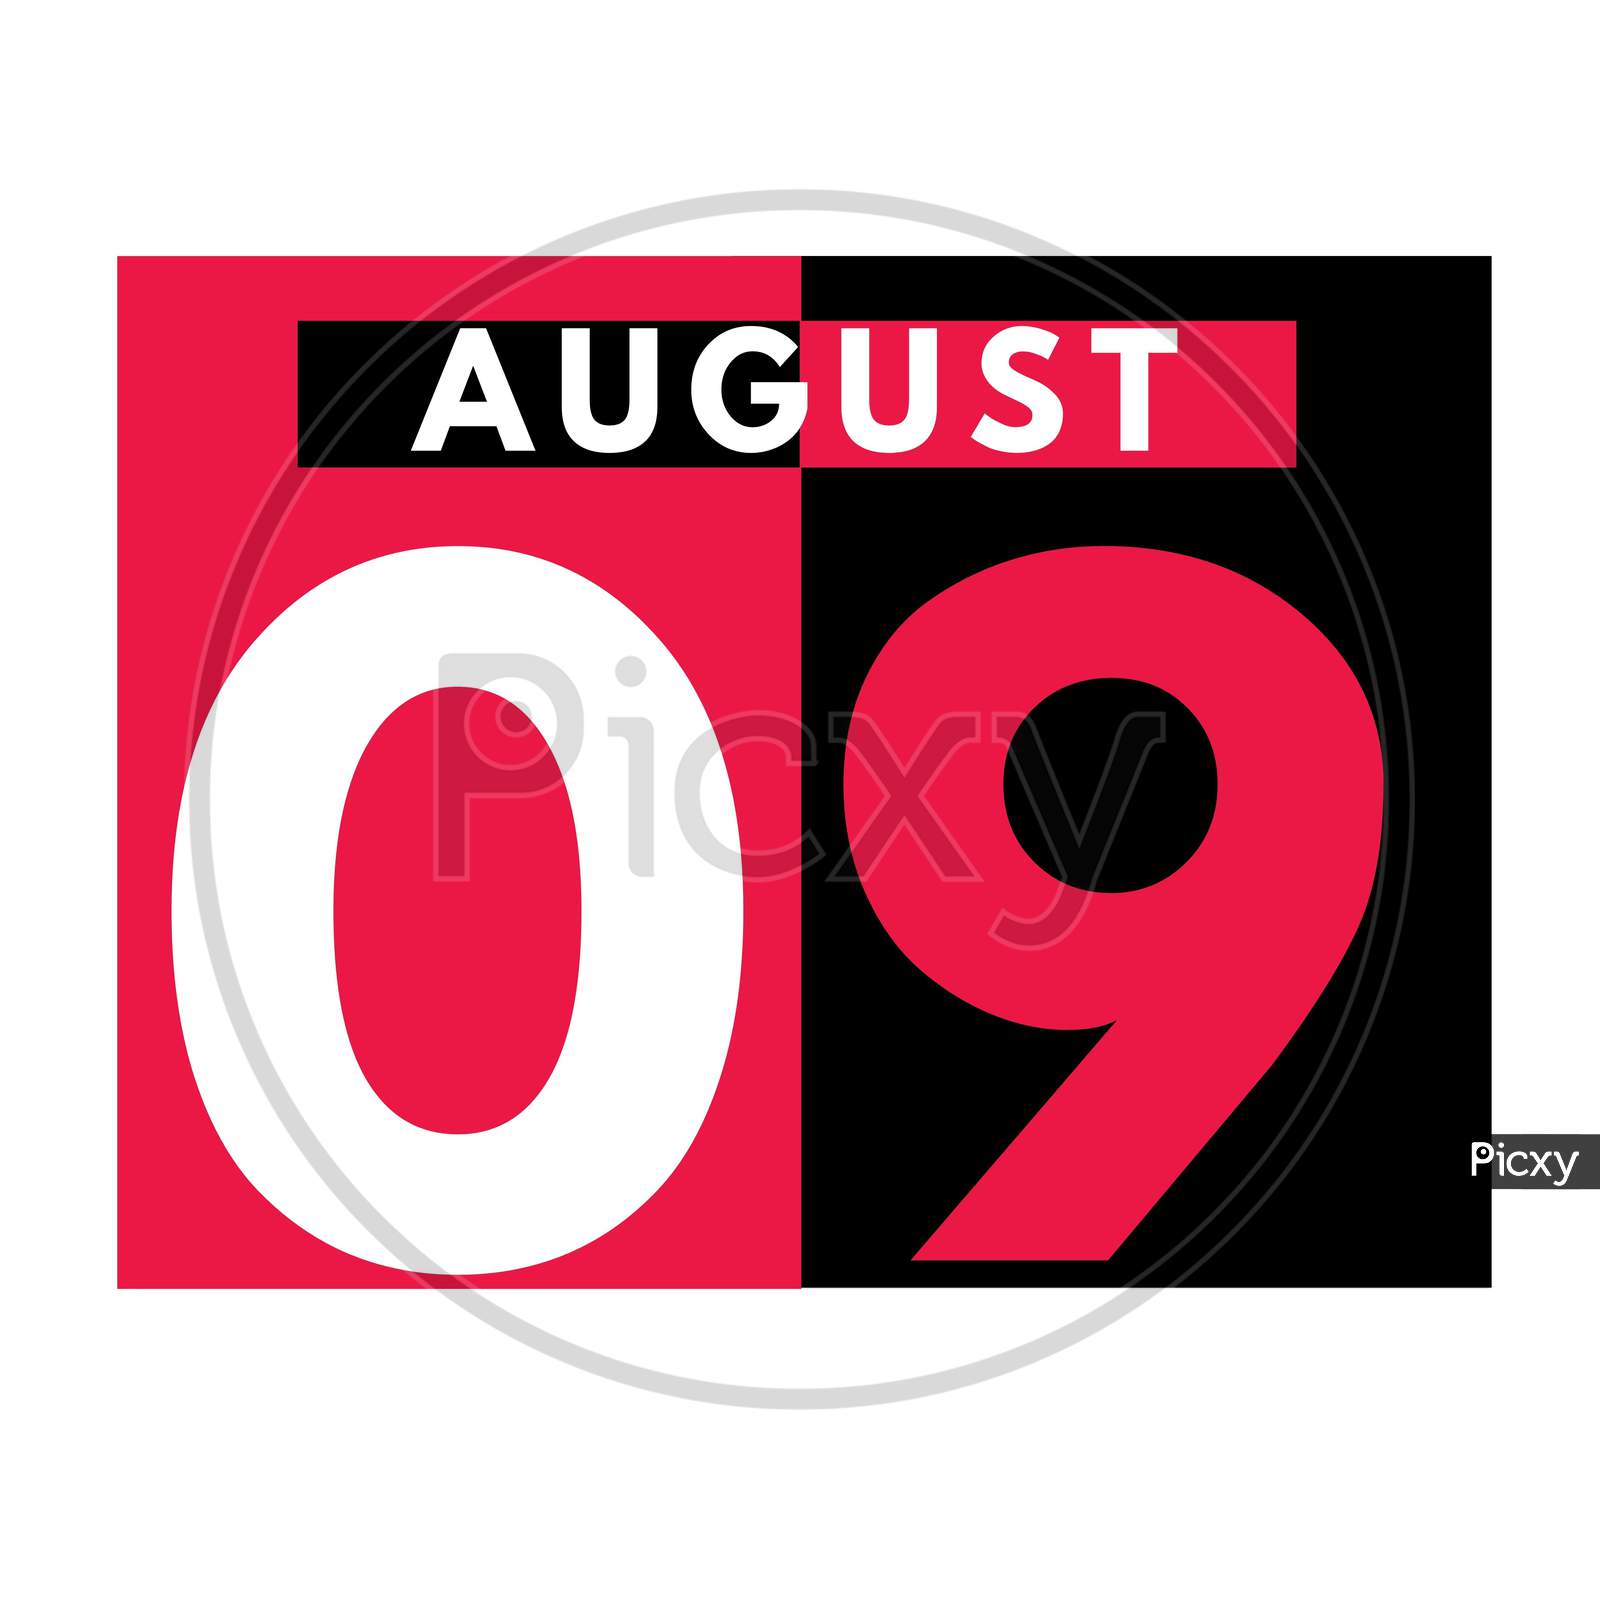 August 9 . Modern Daily Calendar Icon .Date ,Day, Month .Calendar For The Month Of August